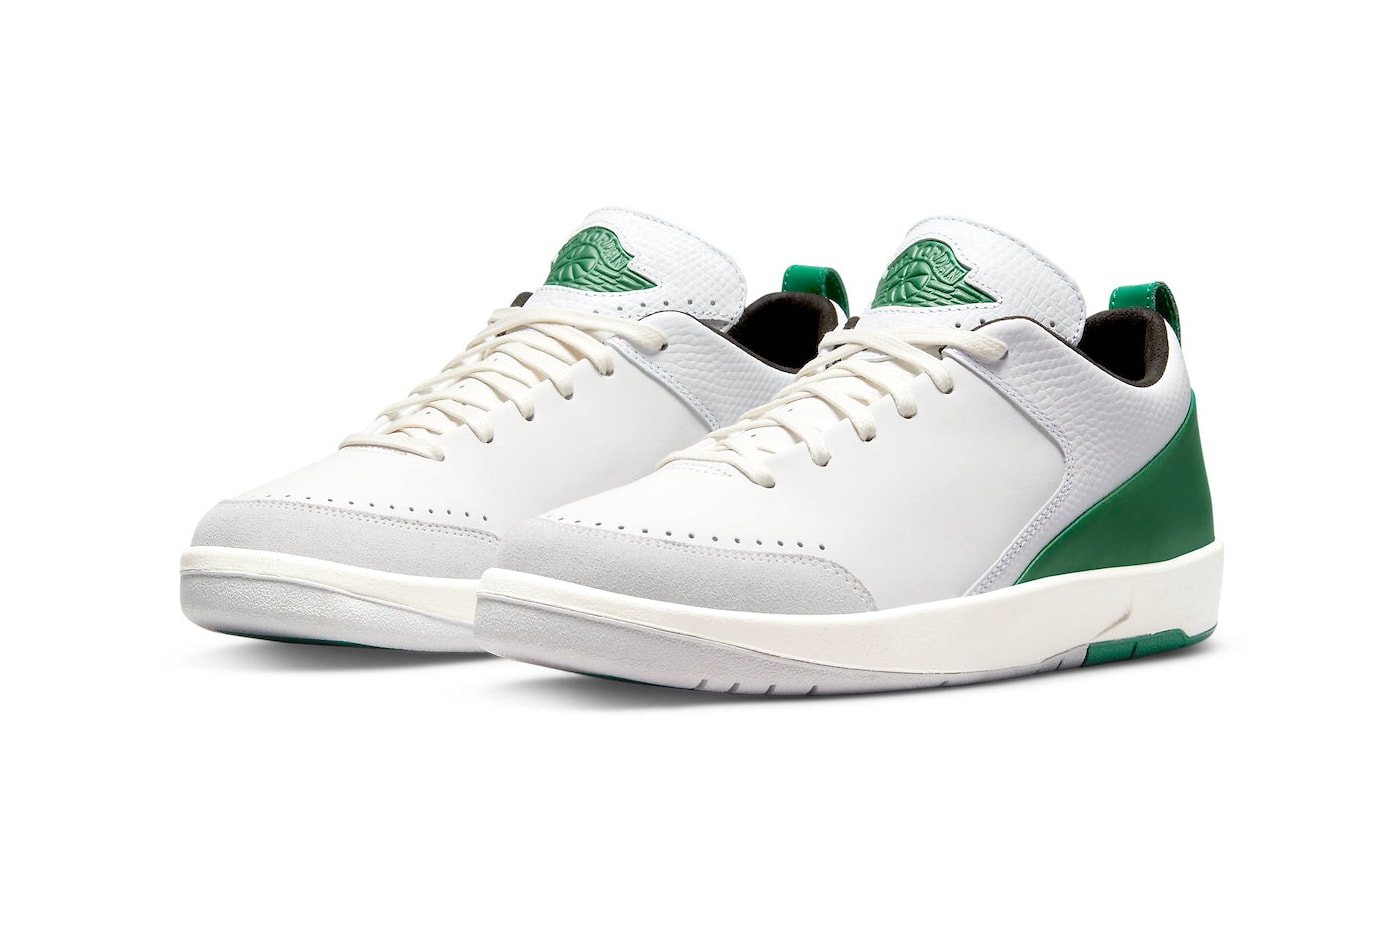 Nina Chanel Abney Air Jordan 2 Low SE Official Look Release Info DQ0560-160 Date Buy Price White Malachite Neutral Grey Sail